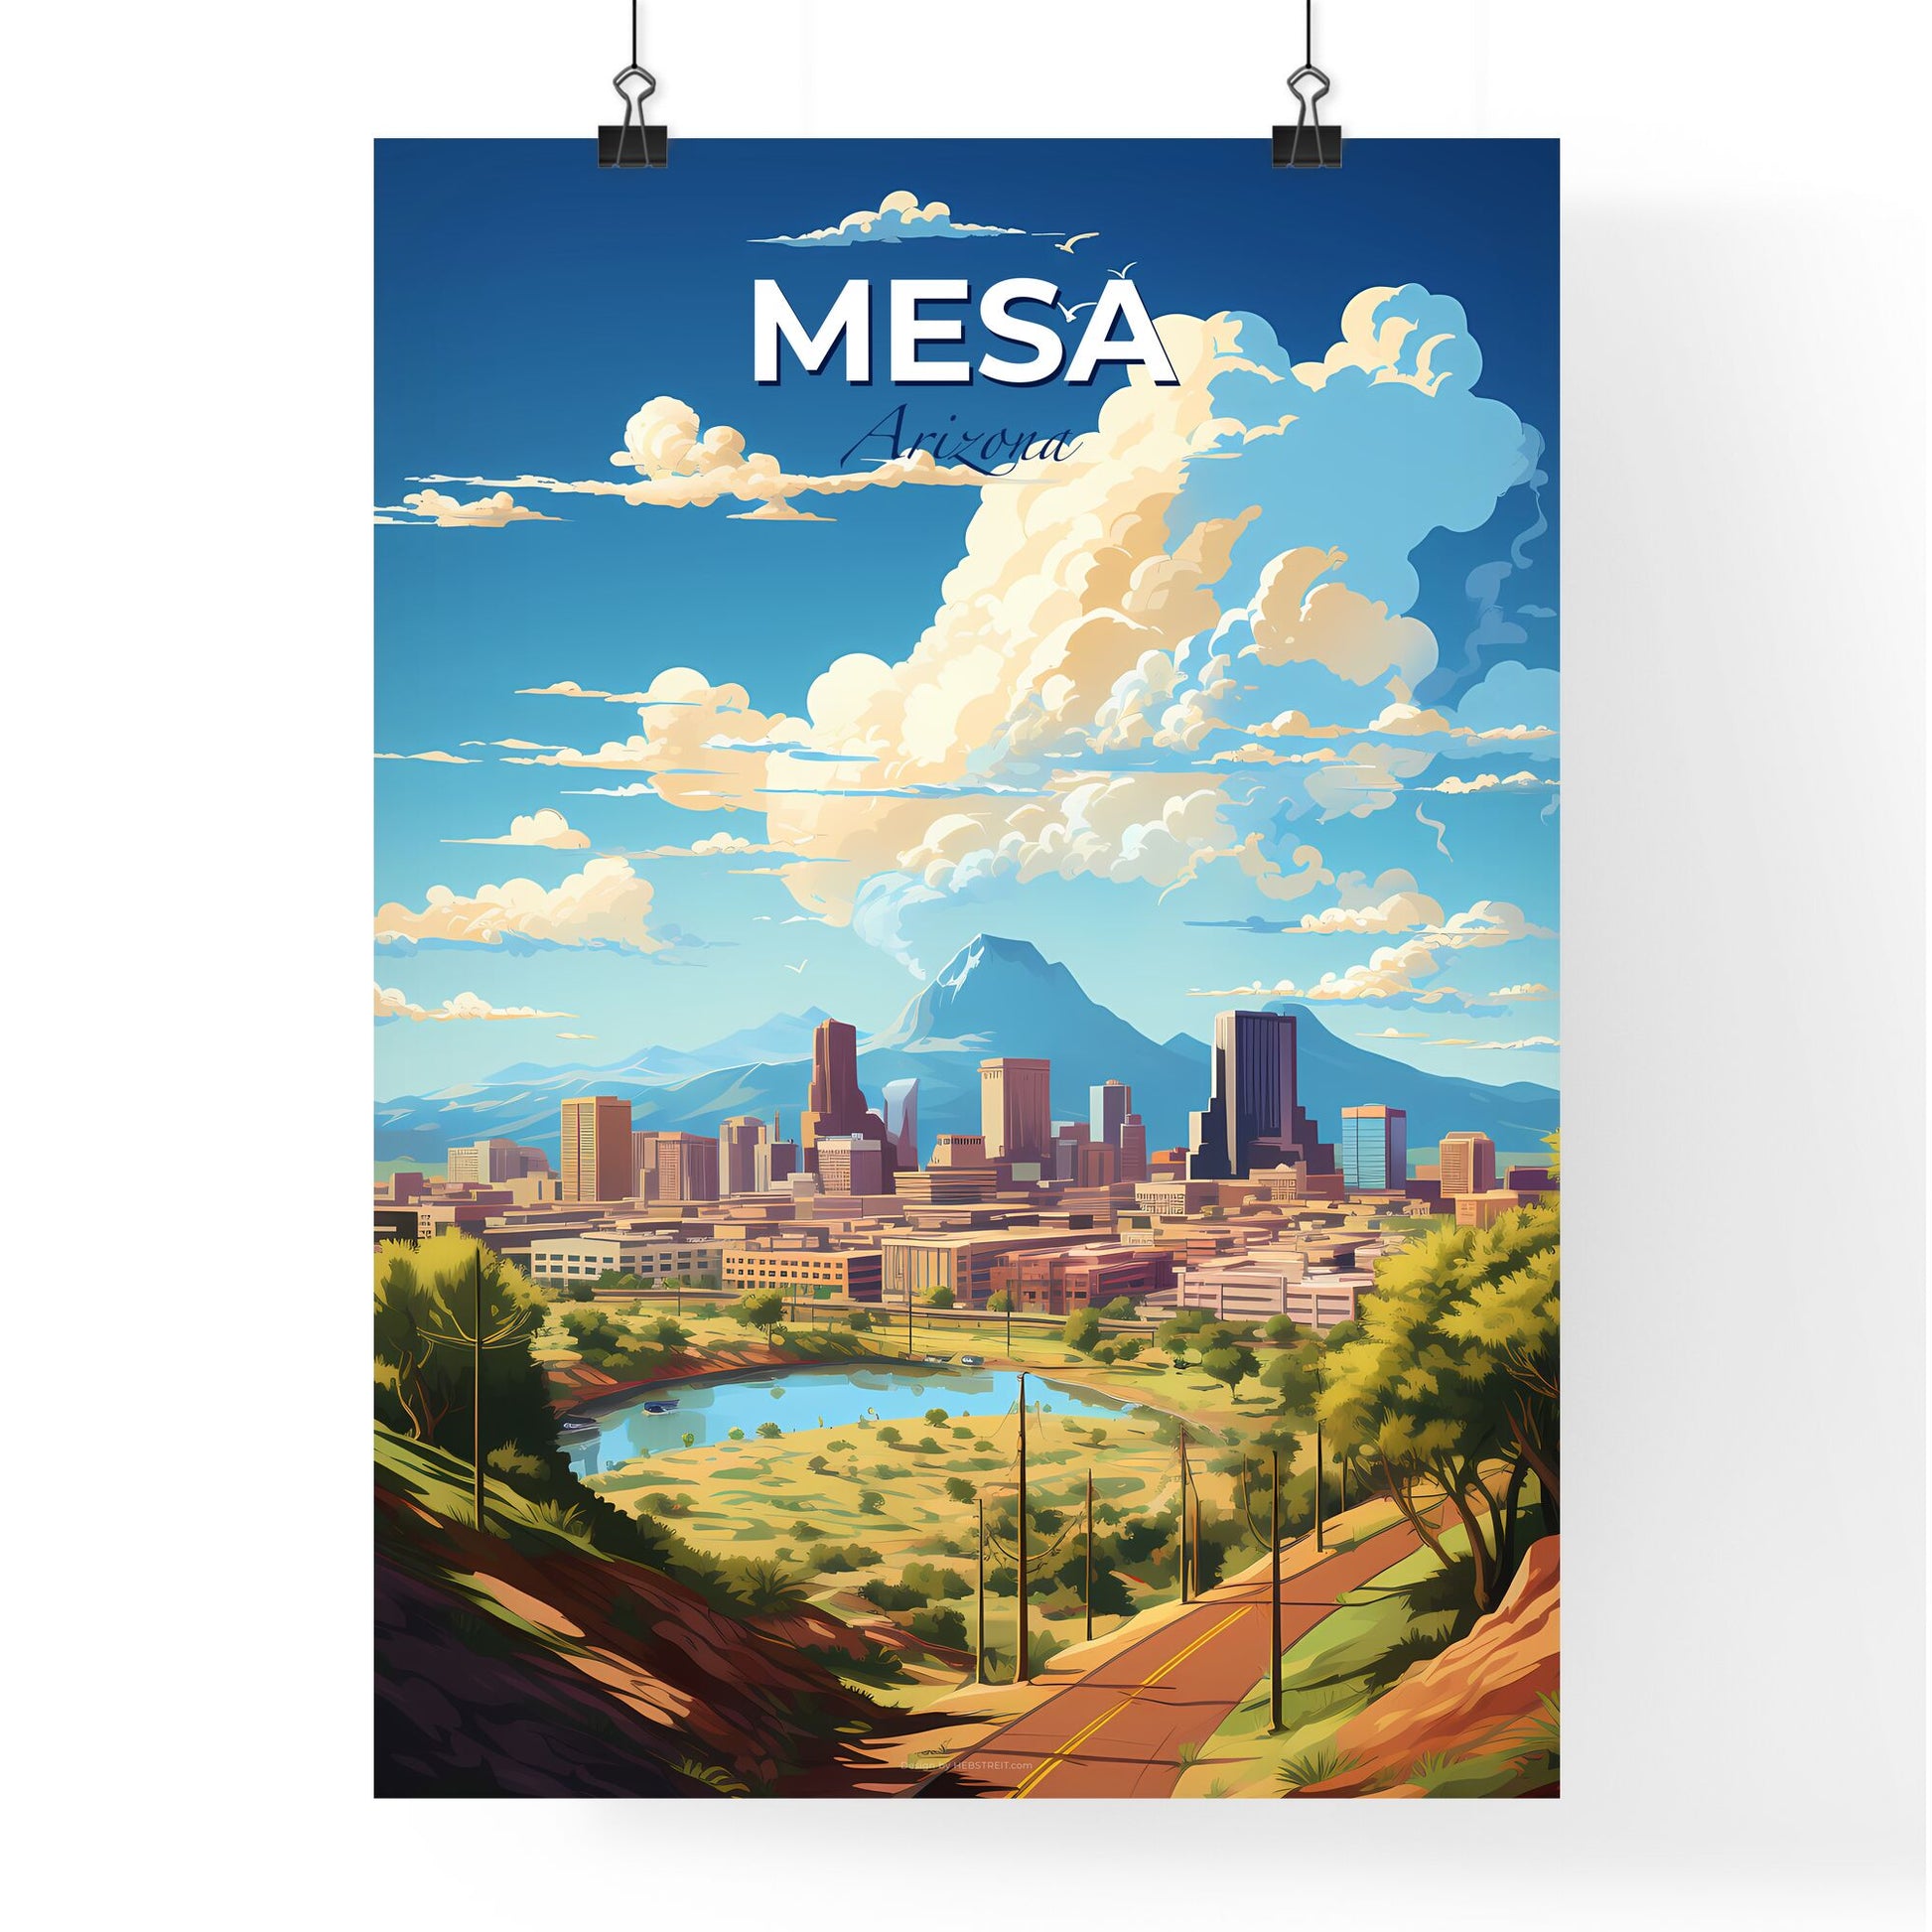 Mesa Arizona Skyline - A Landscape Of A City With A Lake And Mountains In The Background - Customizable Travel Gift Default Title